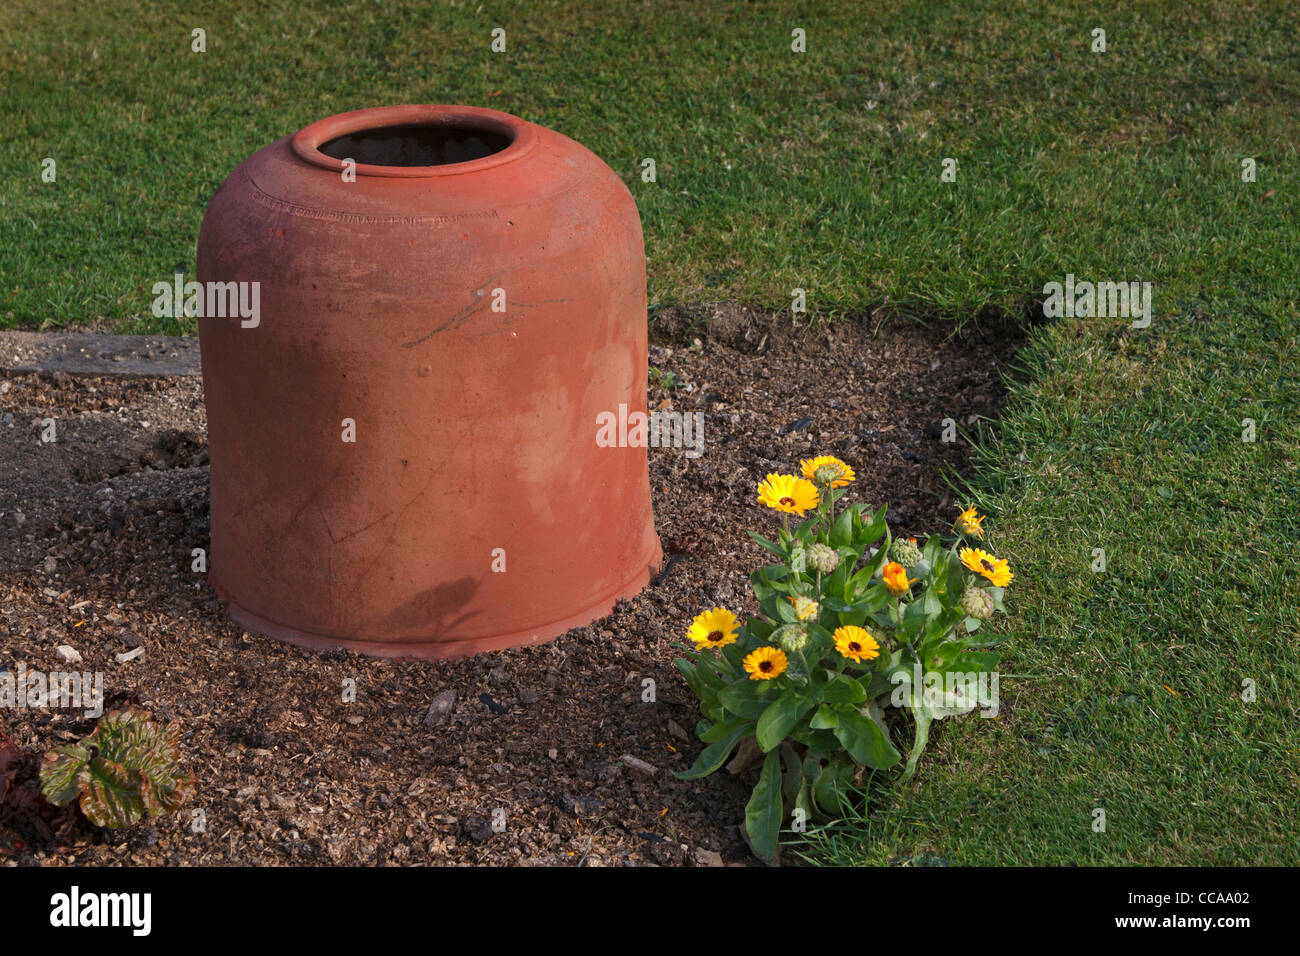 A terracotta rhubarb forcing pot with a clump of pretty yellow marigolds are a spot of colour on an autumn day. Stock Photo